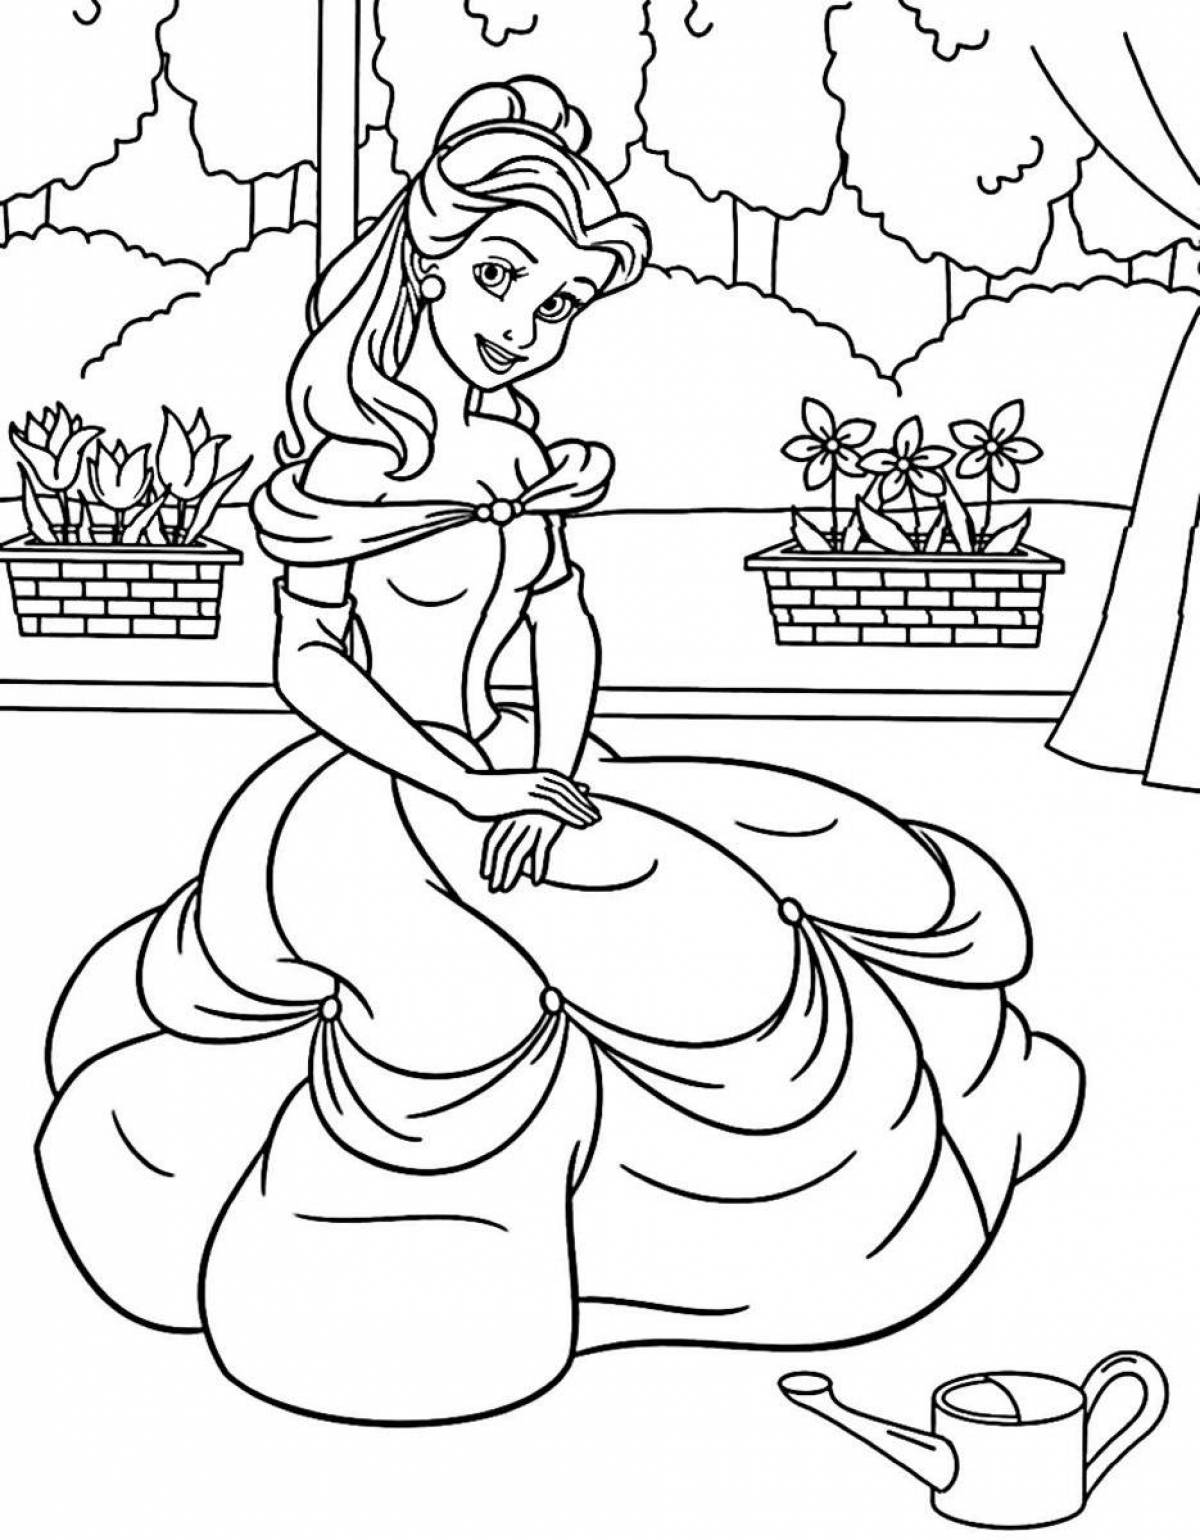 Amazing coloring book for kids 6-7 years old princess